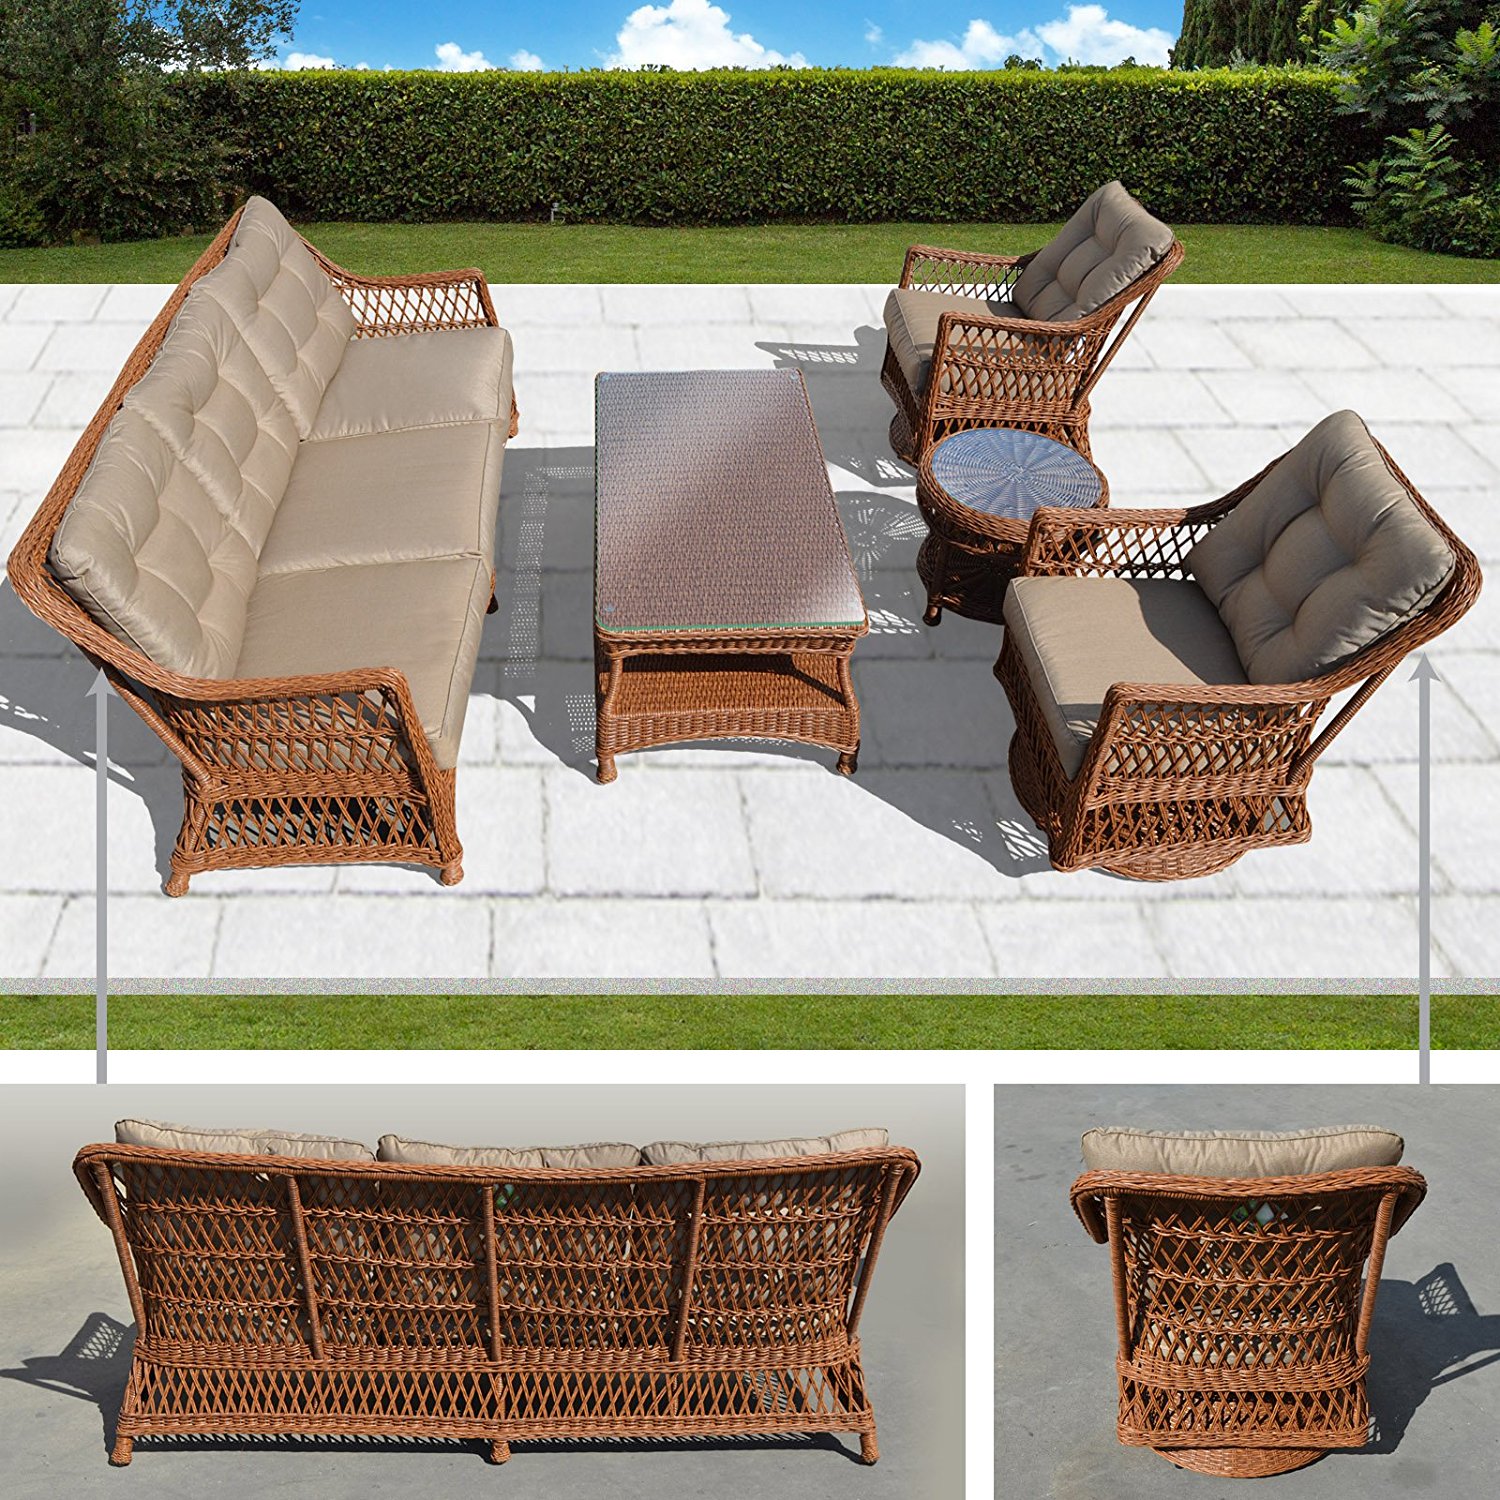 Sunny 5pc Wicker Rattan Table Chair Patio Sofa Furniture Set with Cushions Outdoor Garden W/ 3 Swivel Revolving Chairs and 2 Tables - image 5 of 8